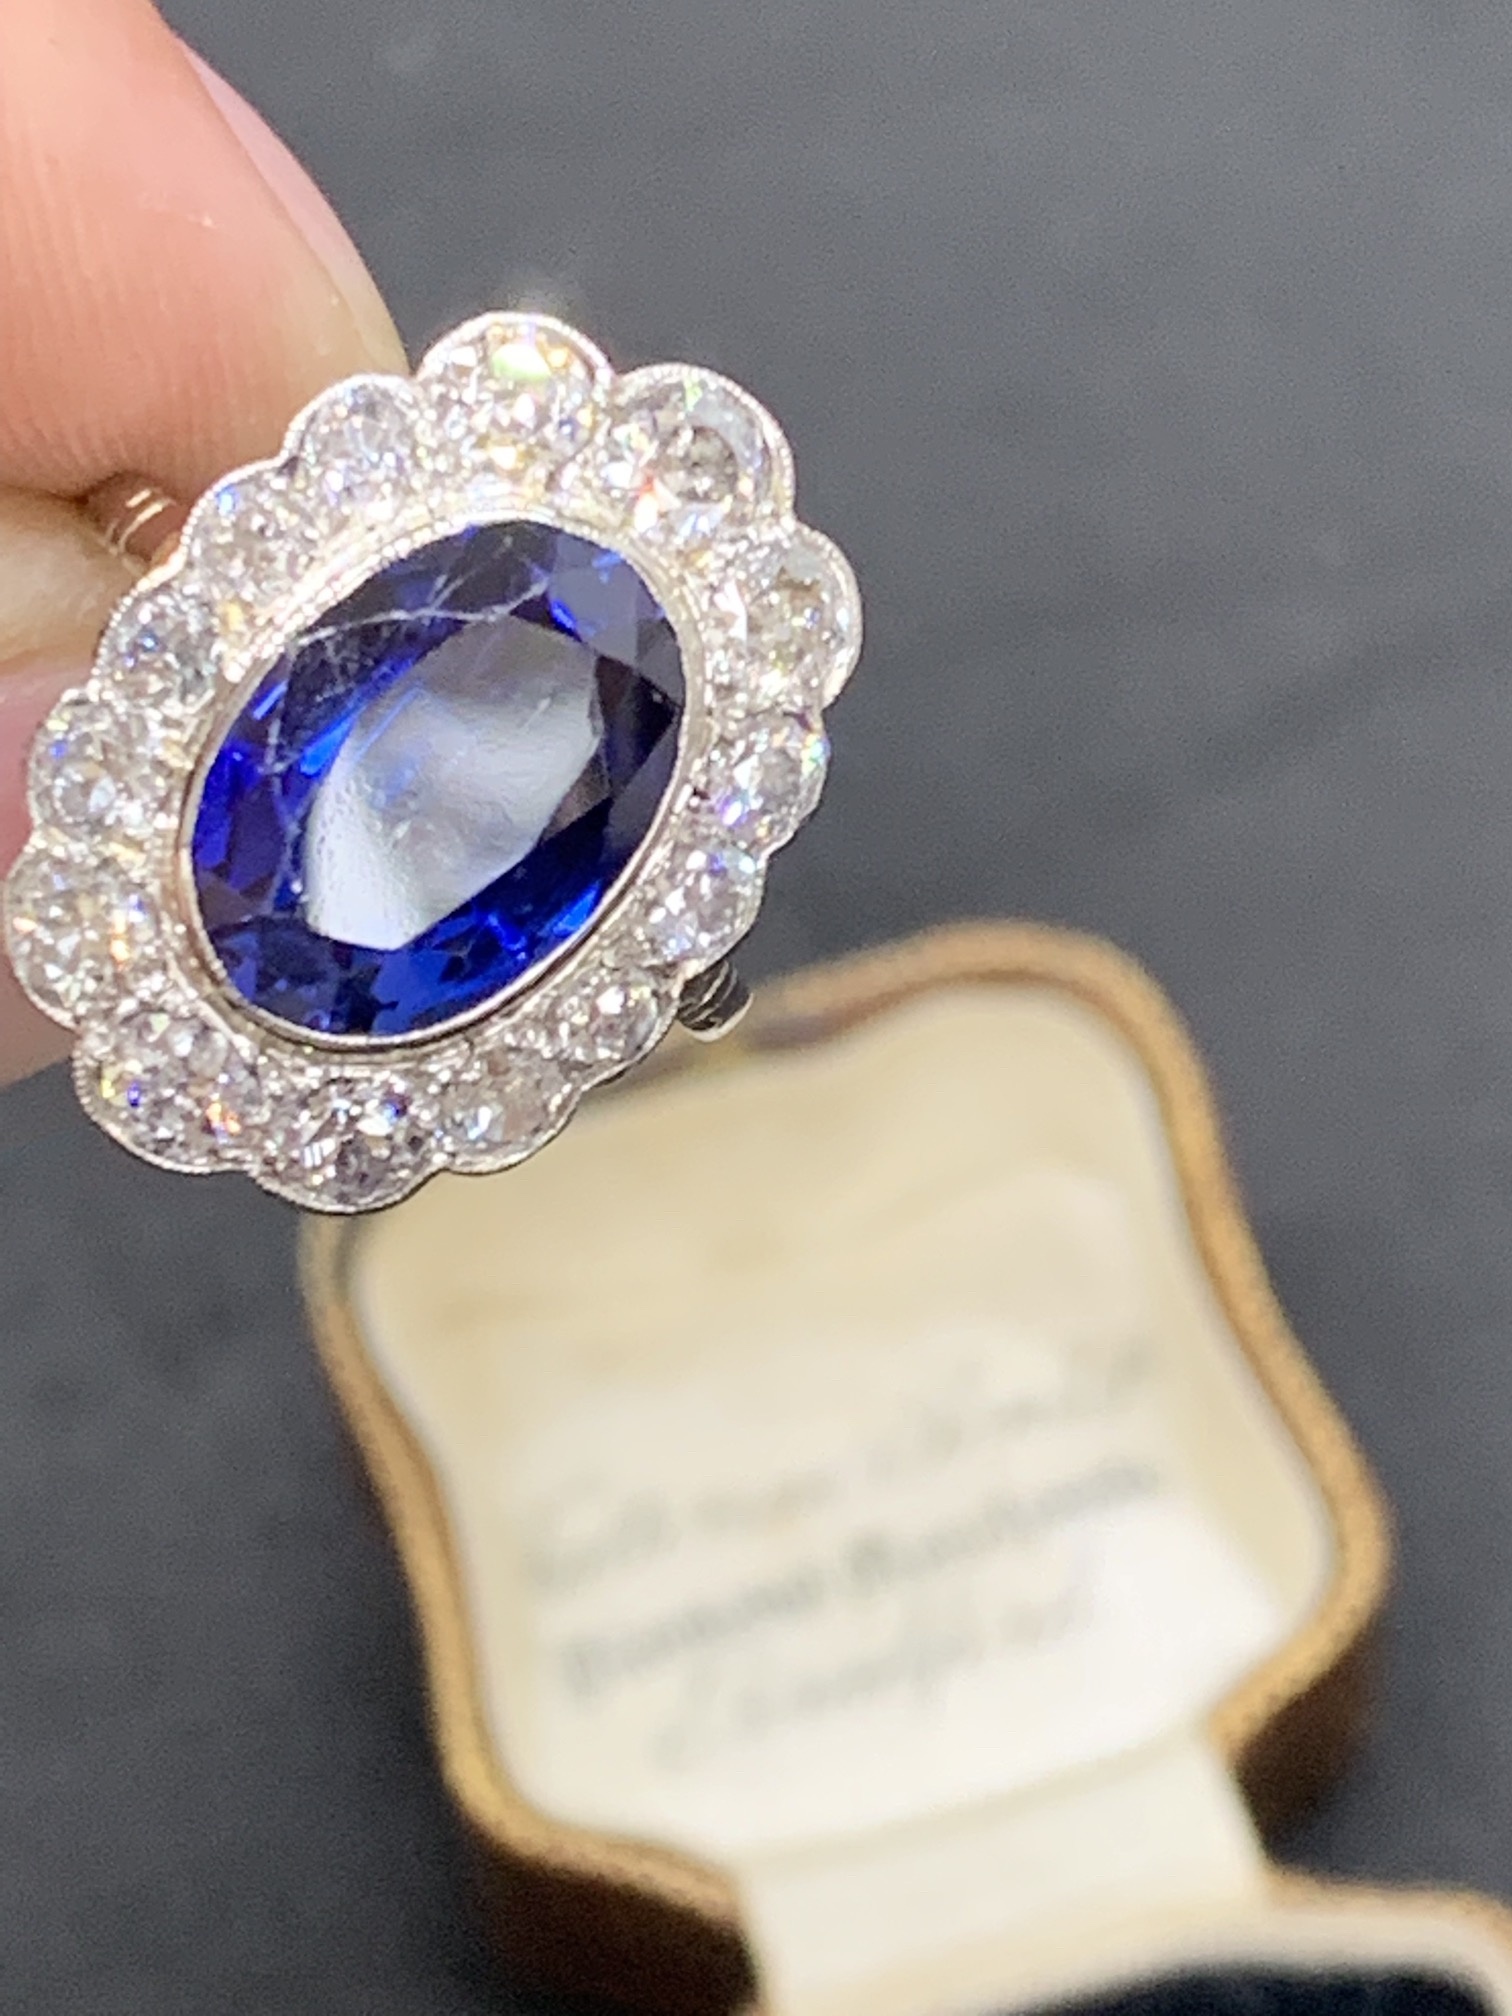 FINE 18ct Gold DIamond & Large Blue Stone Ring - approx 2cts of Diamonds + - Image 11 of 14